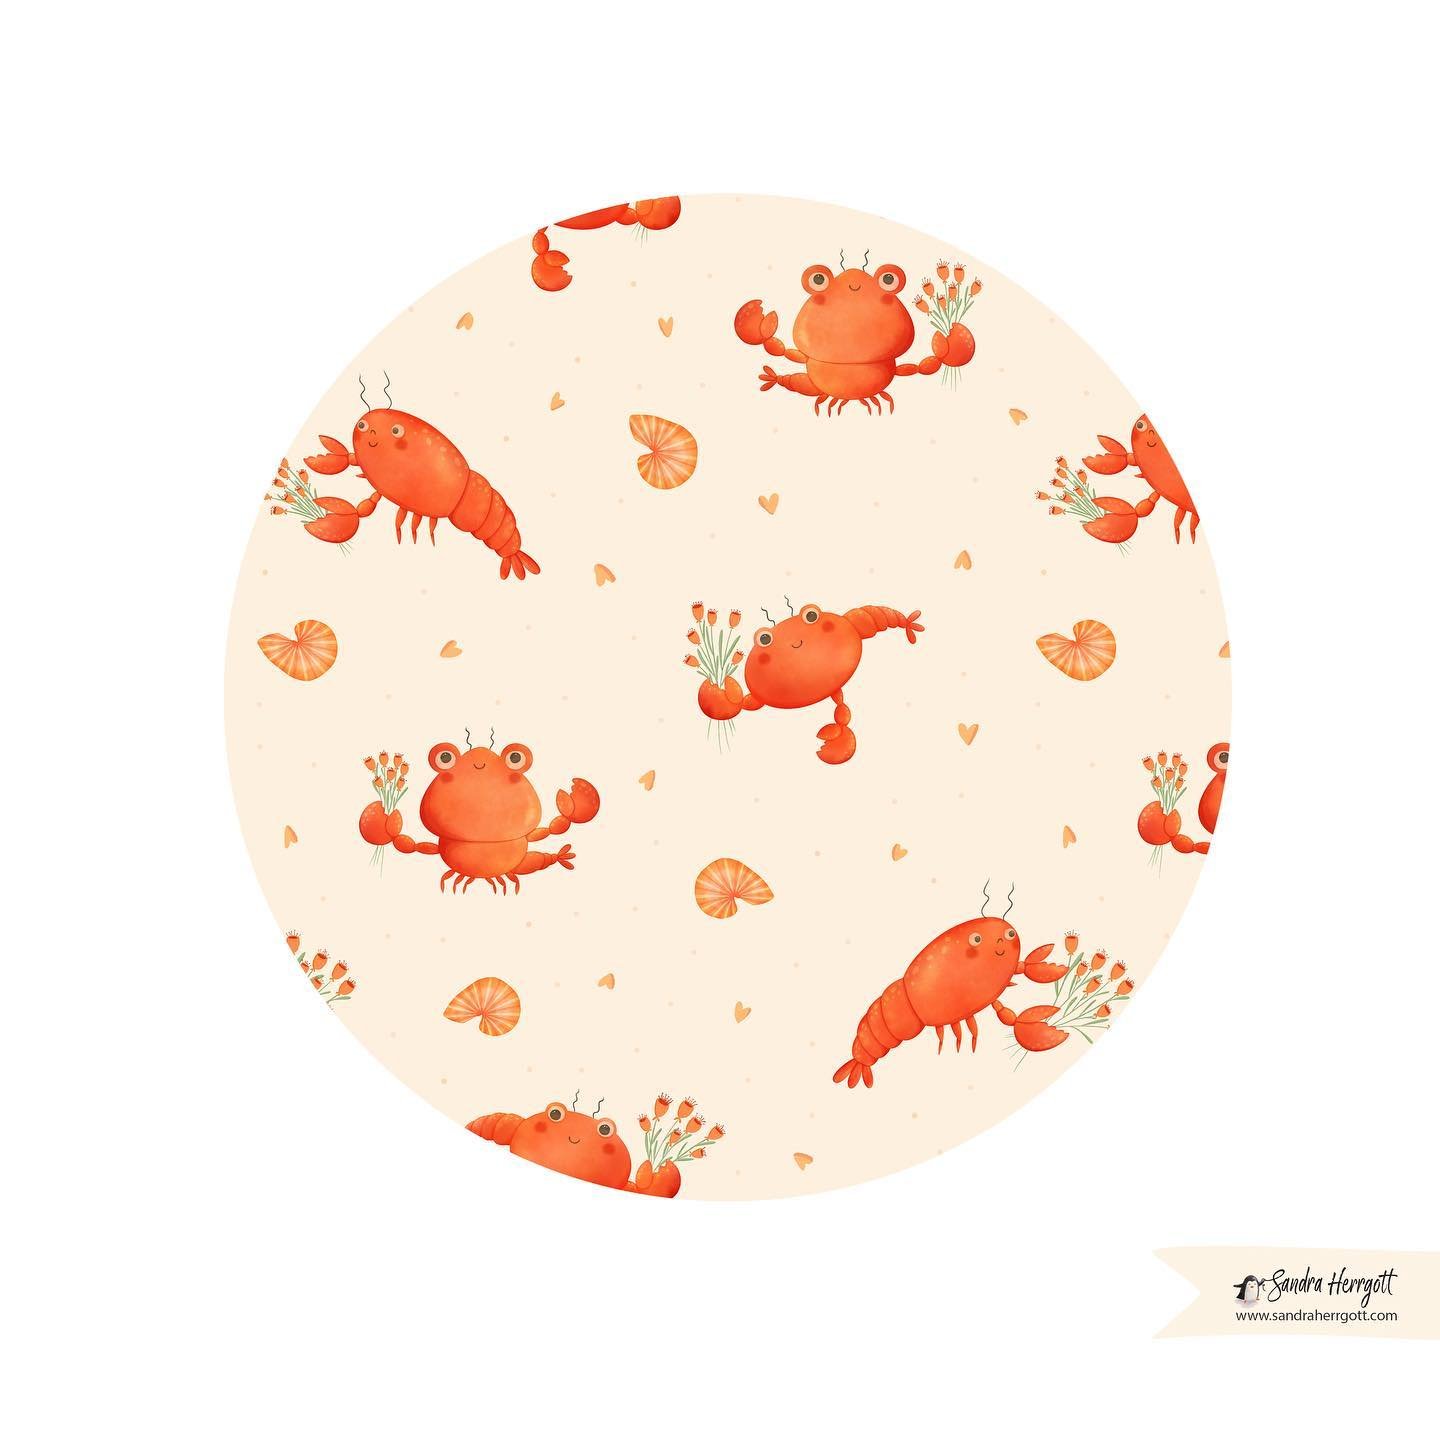 And here are the three lobster friends all together. Swipe to see some Color options and mock-ups. Which one is your favourite?
.
I have submitted the dark blue version to the current #spoonflowerchallenge of crustacean-core. You can vote for your fa